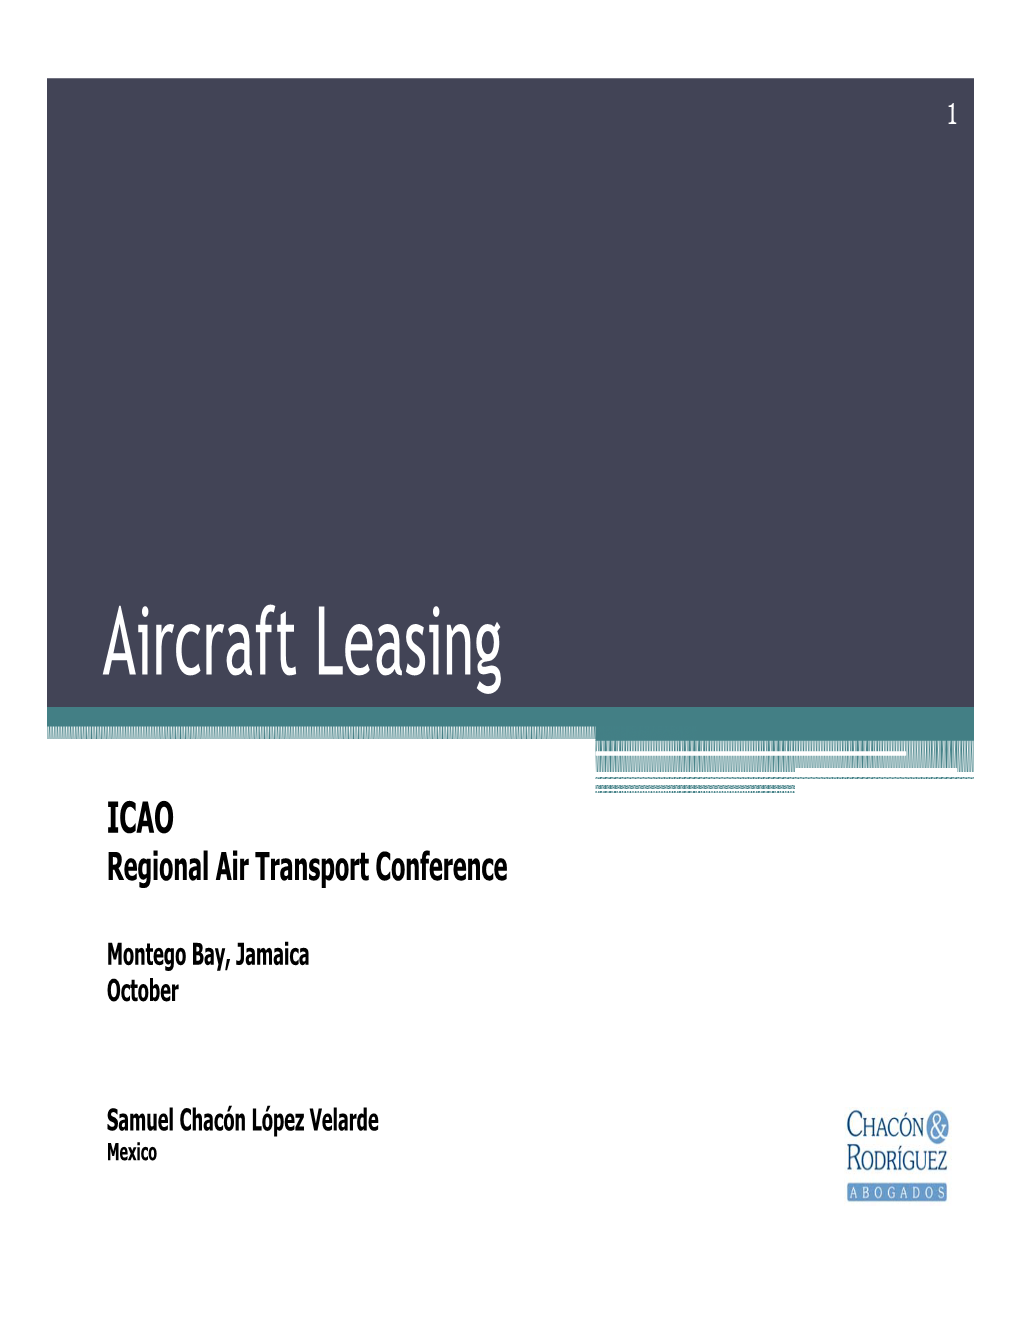 ICAO Regional Air Transport Conference